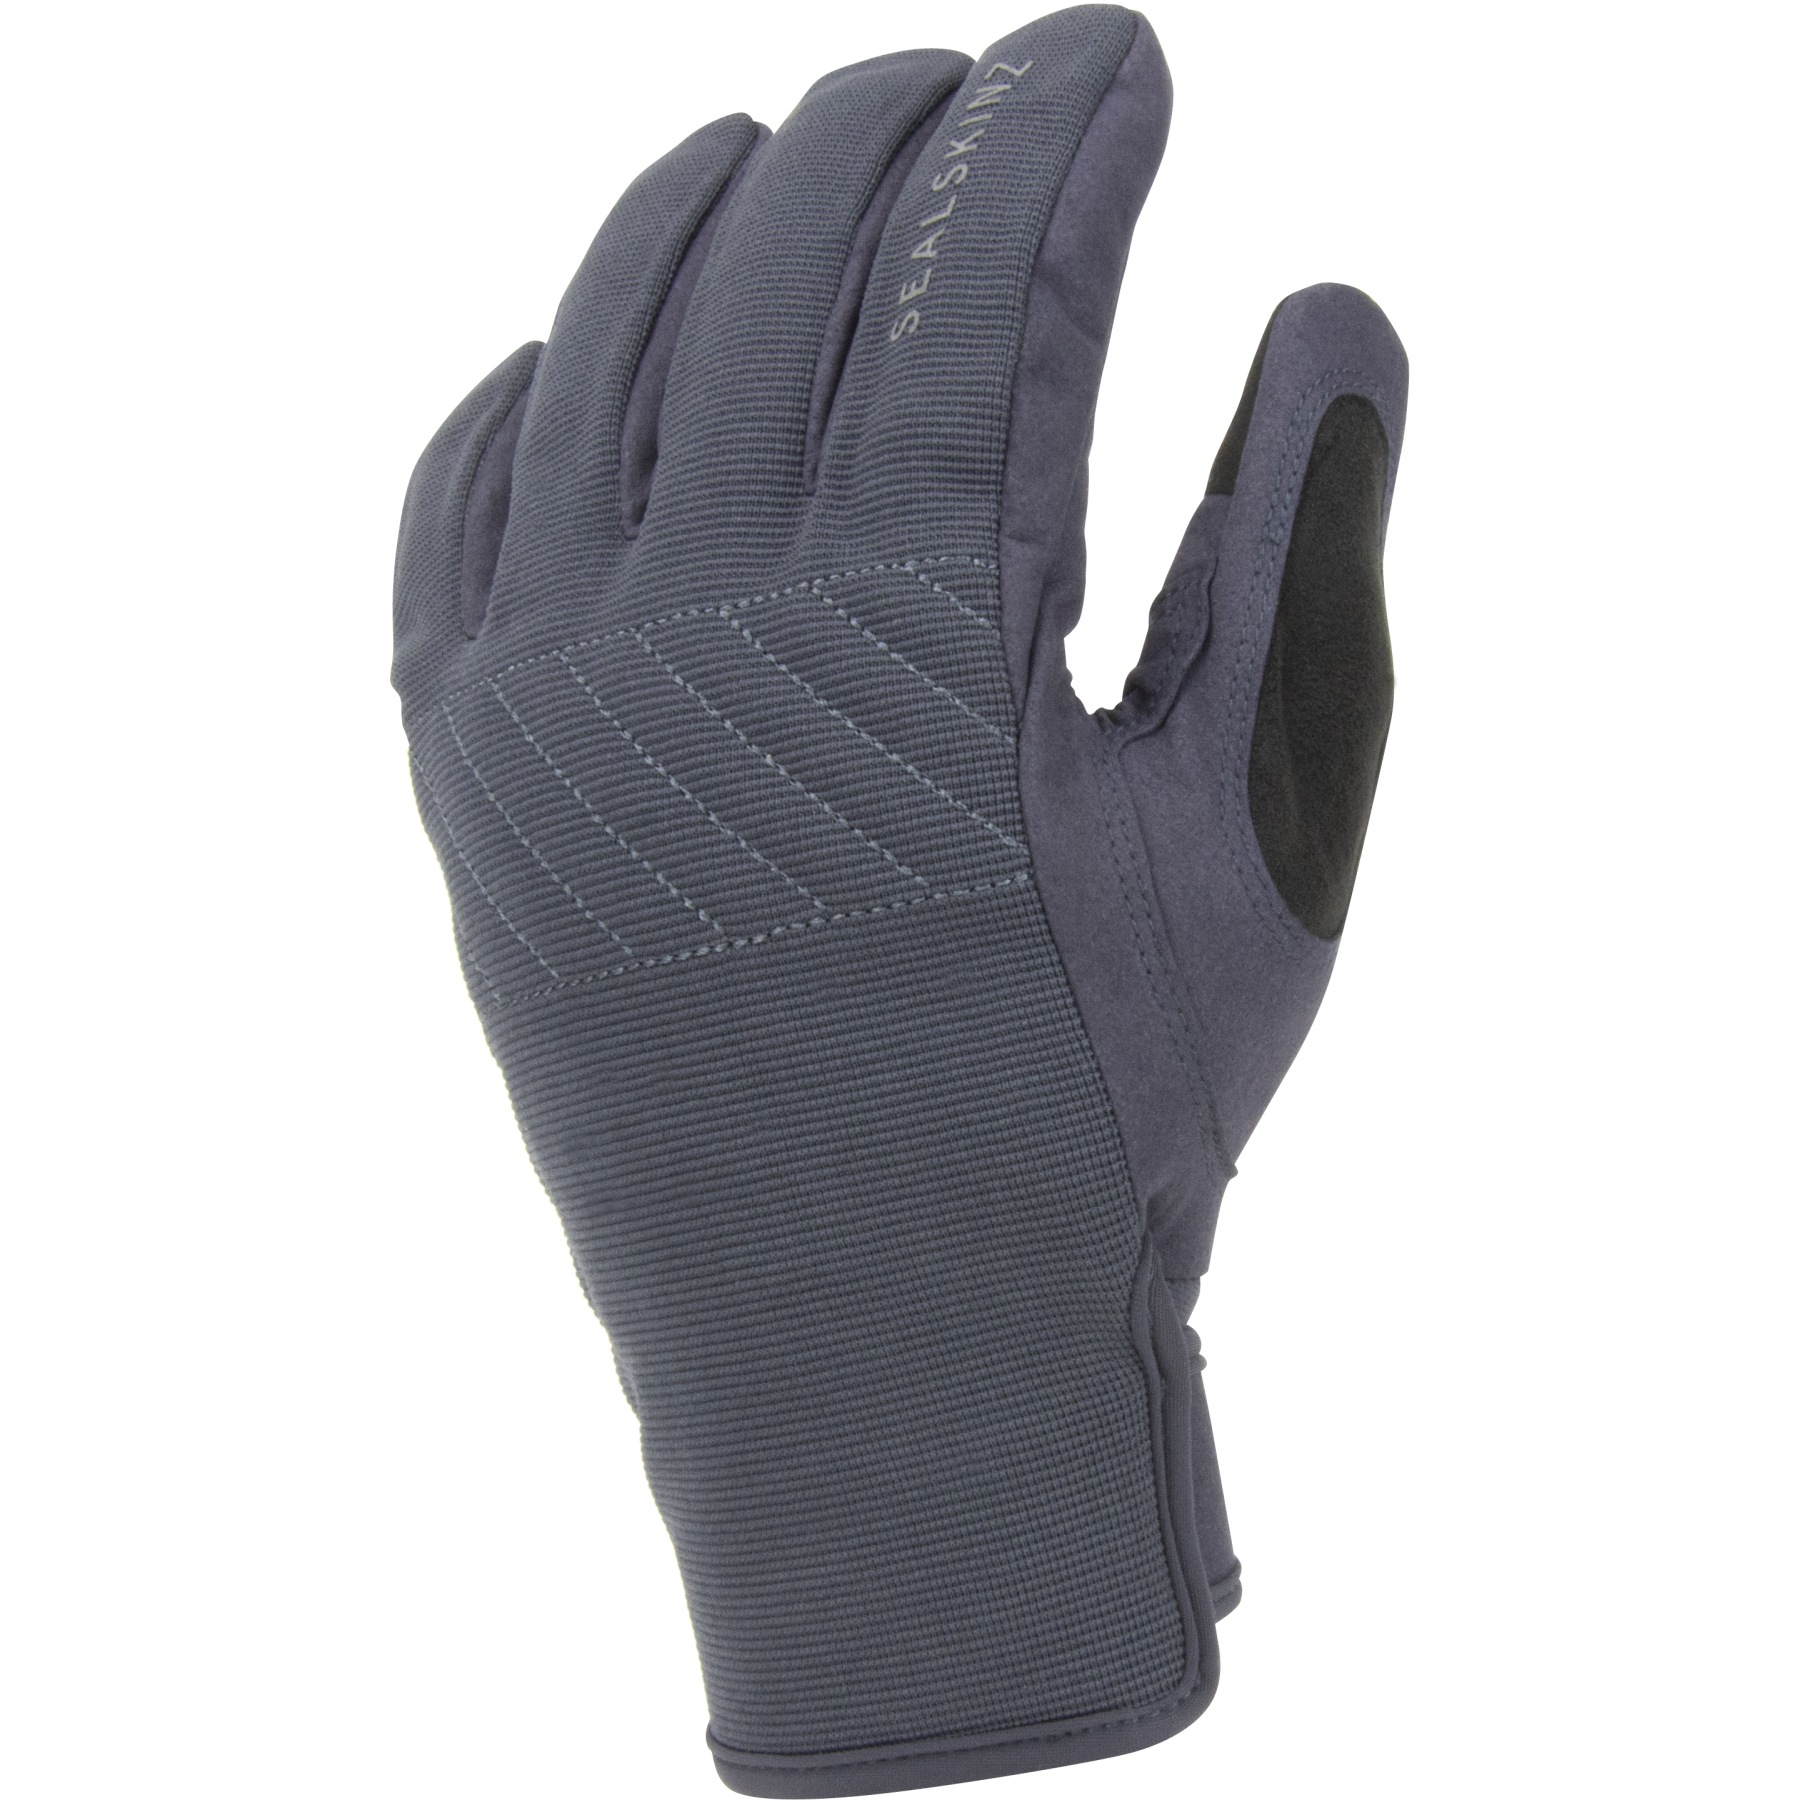 Picture of SealSkinz Howe Waterproof All Weather Multi-Activity Gloves with Fusion Control™ - Grey/Black